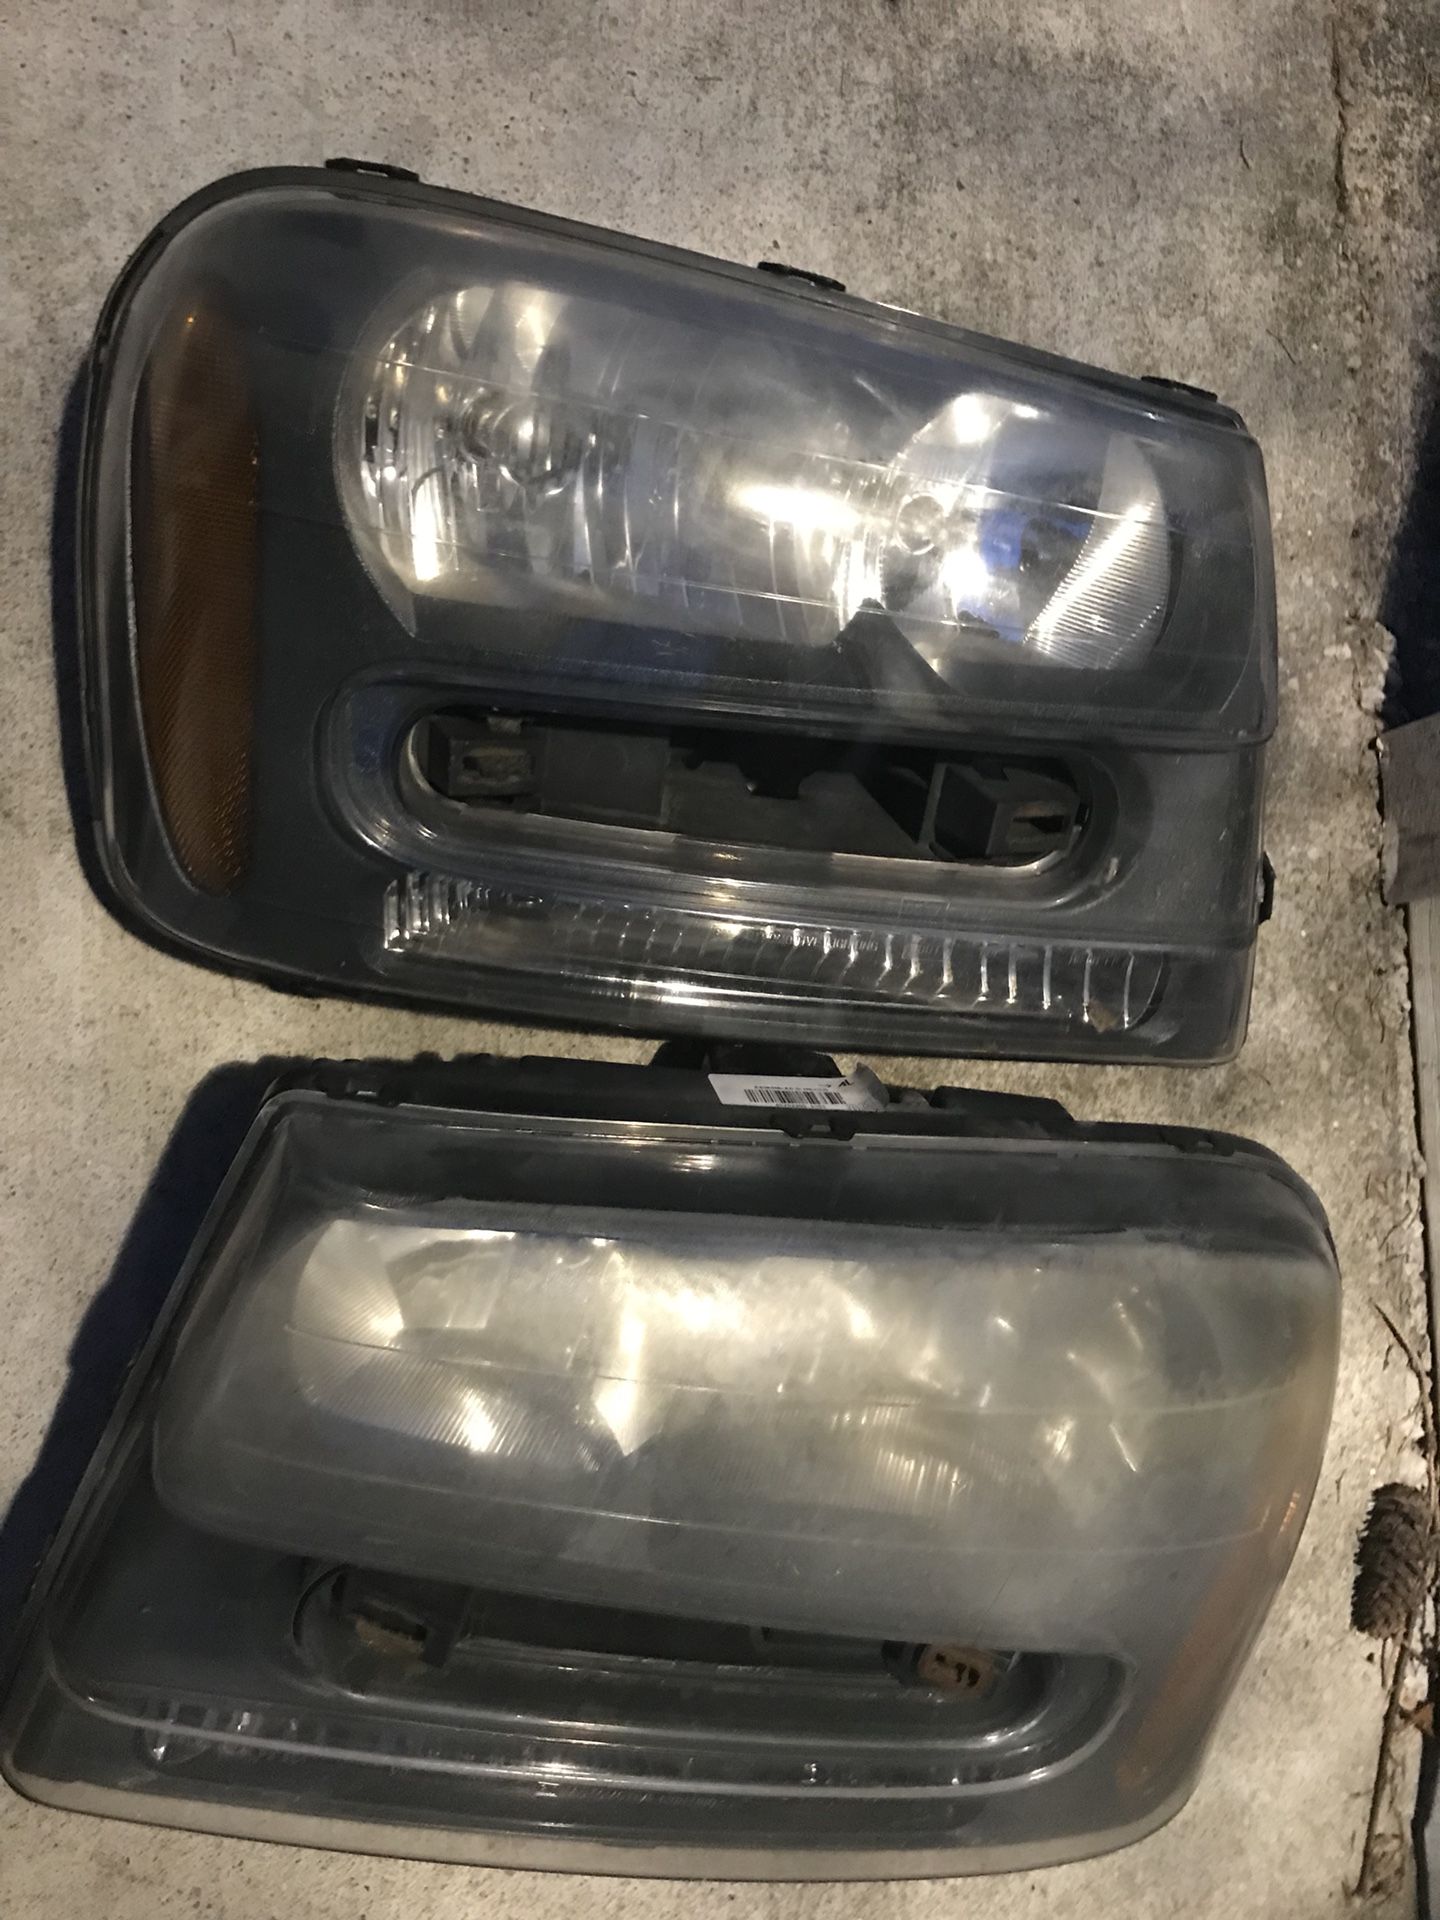 Chevy trailblazer 2008 headlights both working conditions-are good